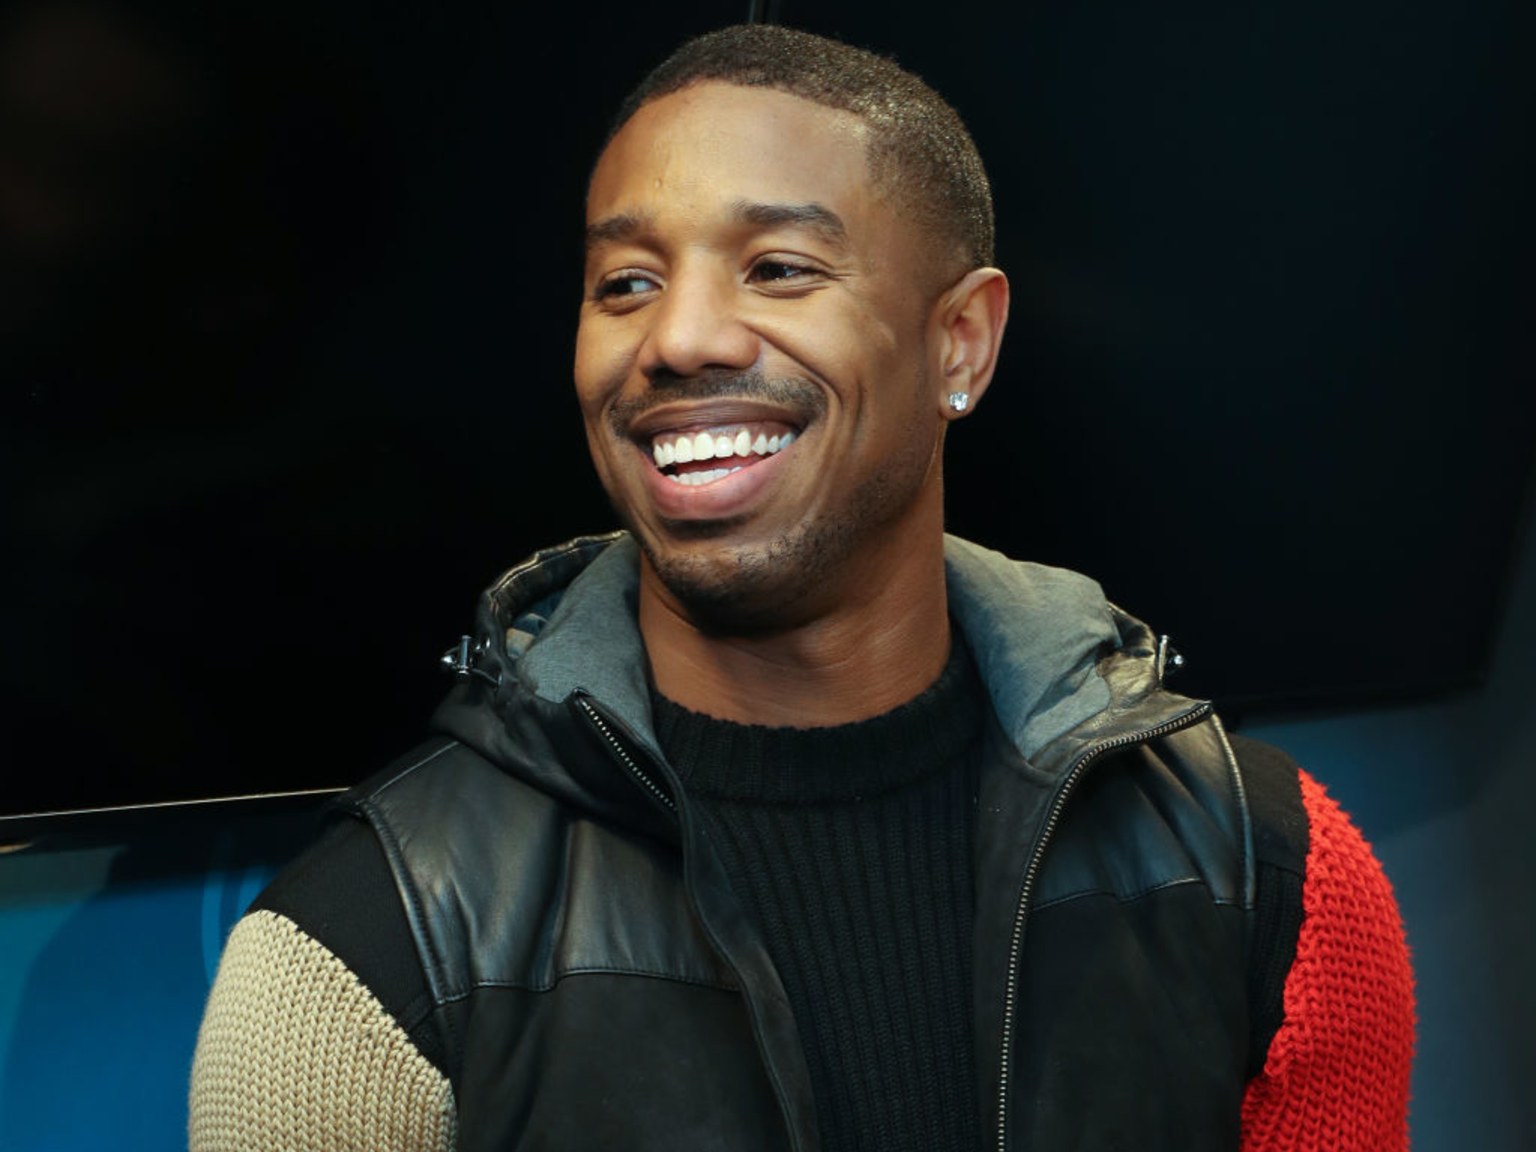 Decide If These Male Celebs Are Attractive to Find Out What Your ❤️ Romantic Personality Is Michael B. Jordan